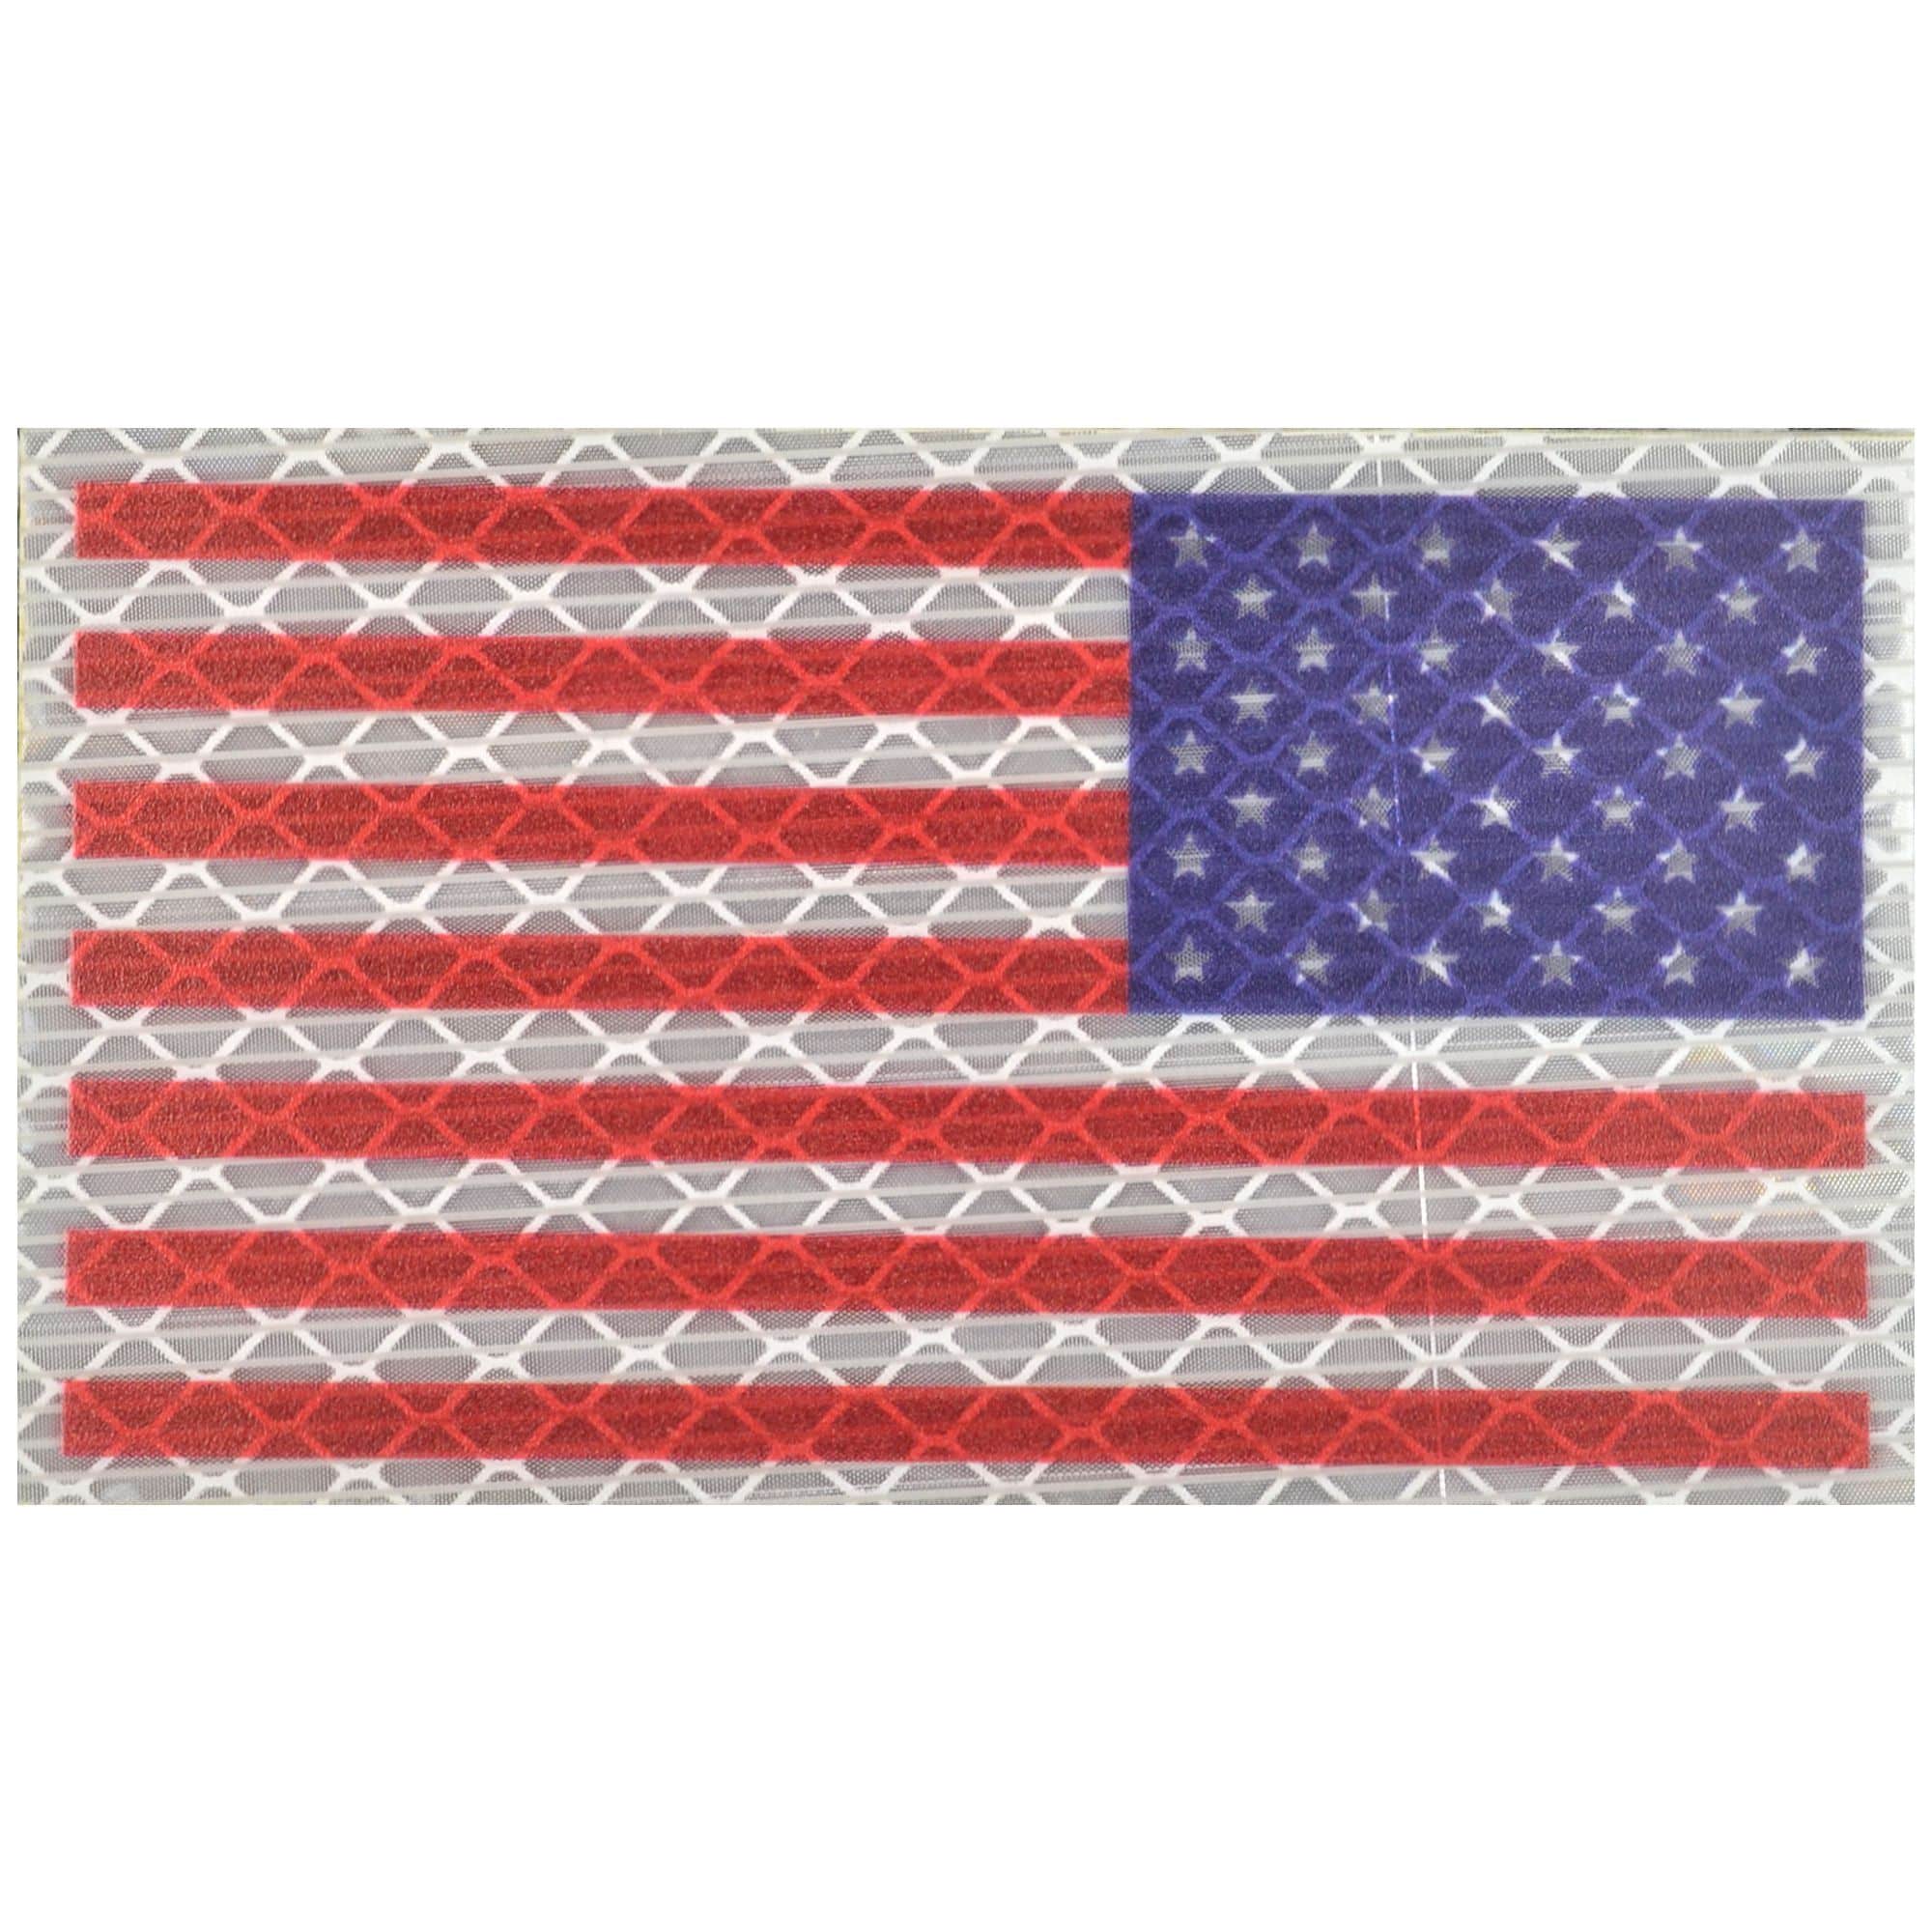 Tactical Gear Junkie Patches Reverse Reflective Printed Full Color US Flag - 2x3.5 Patch